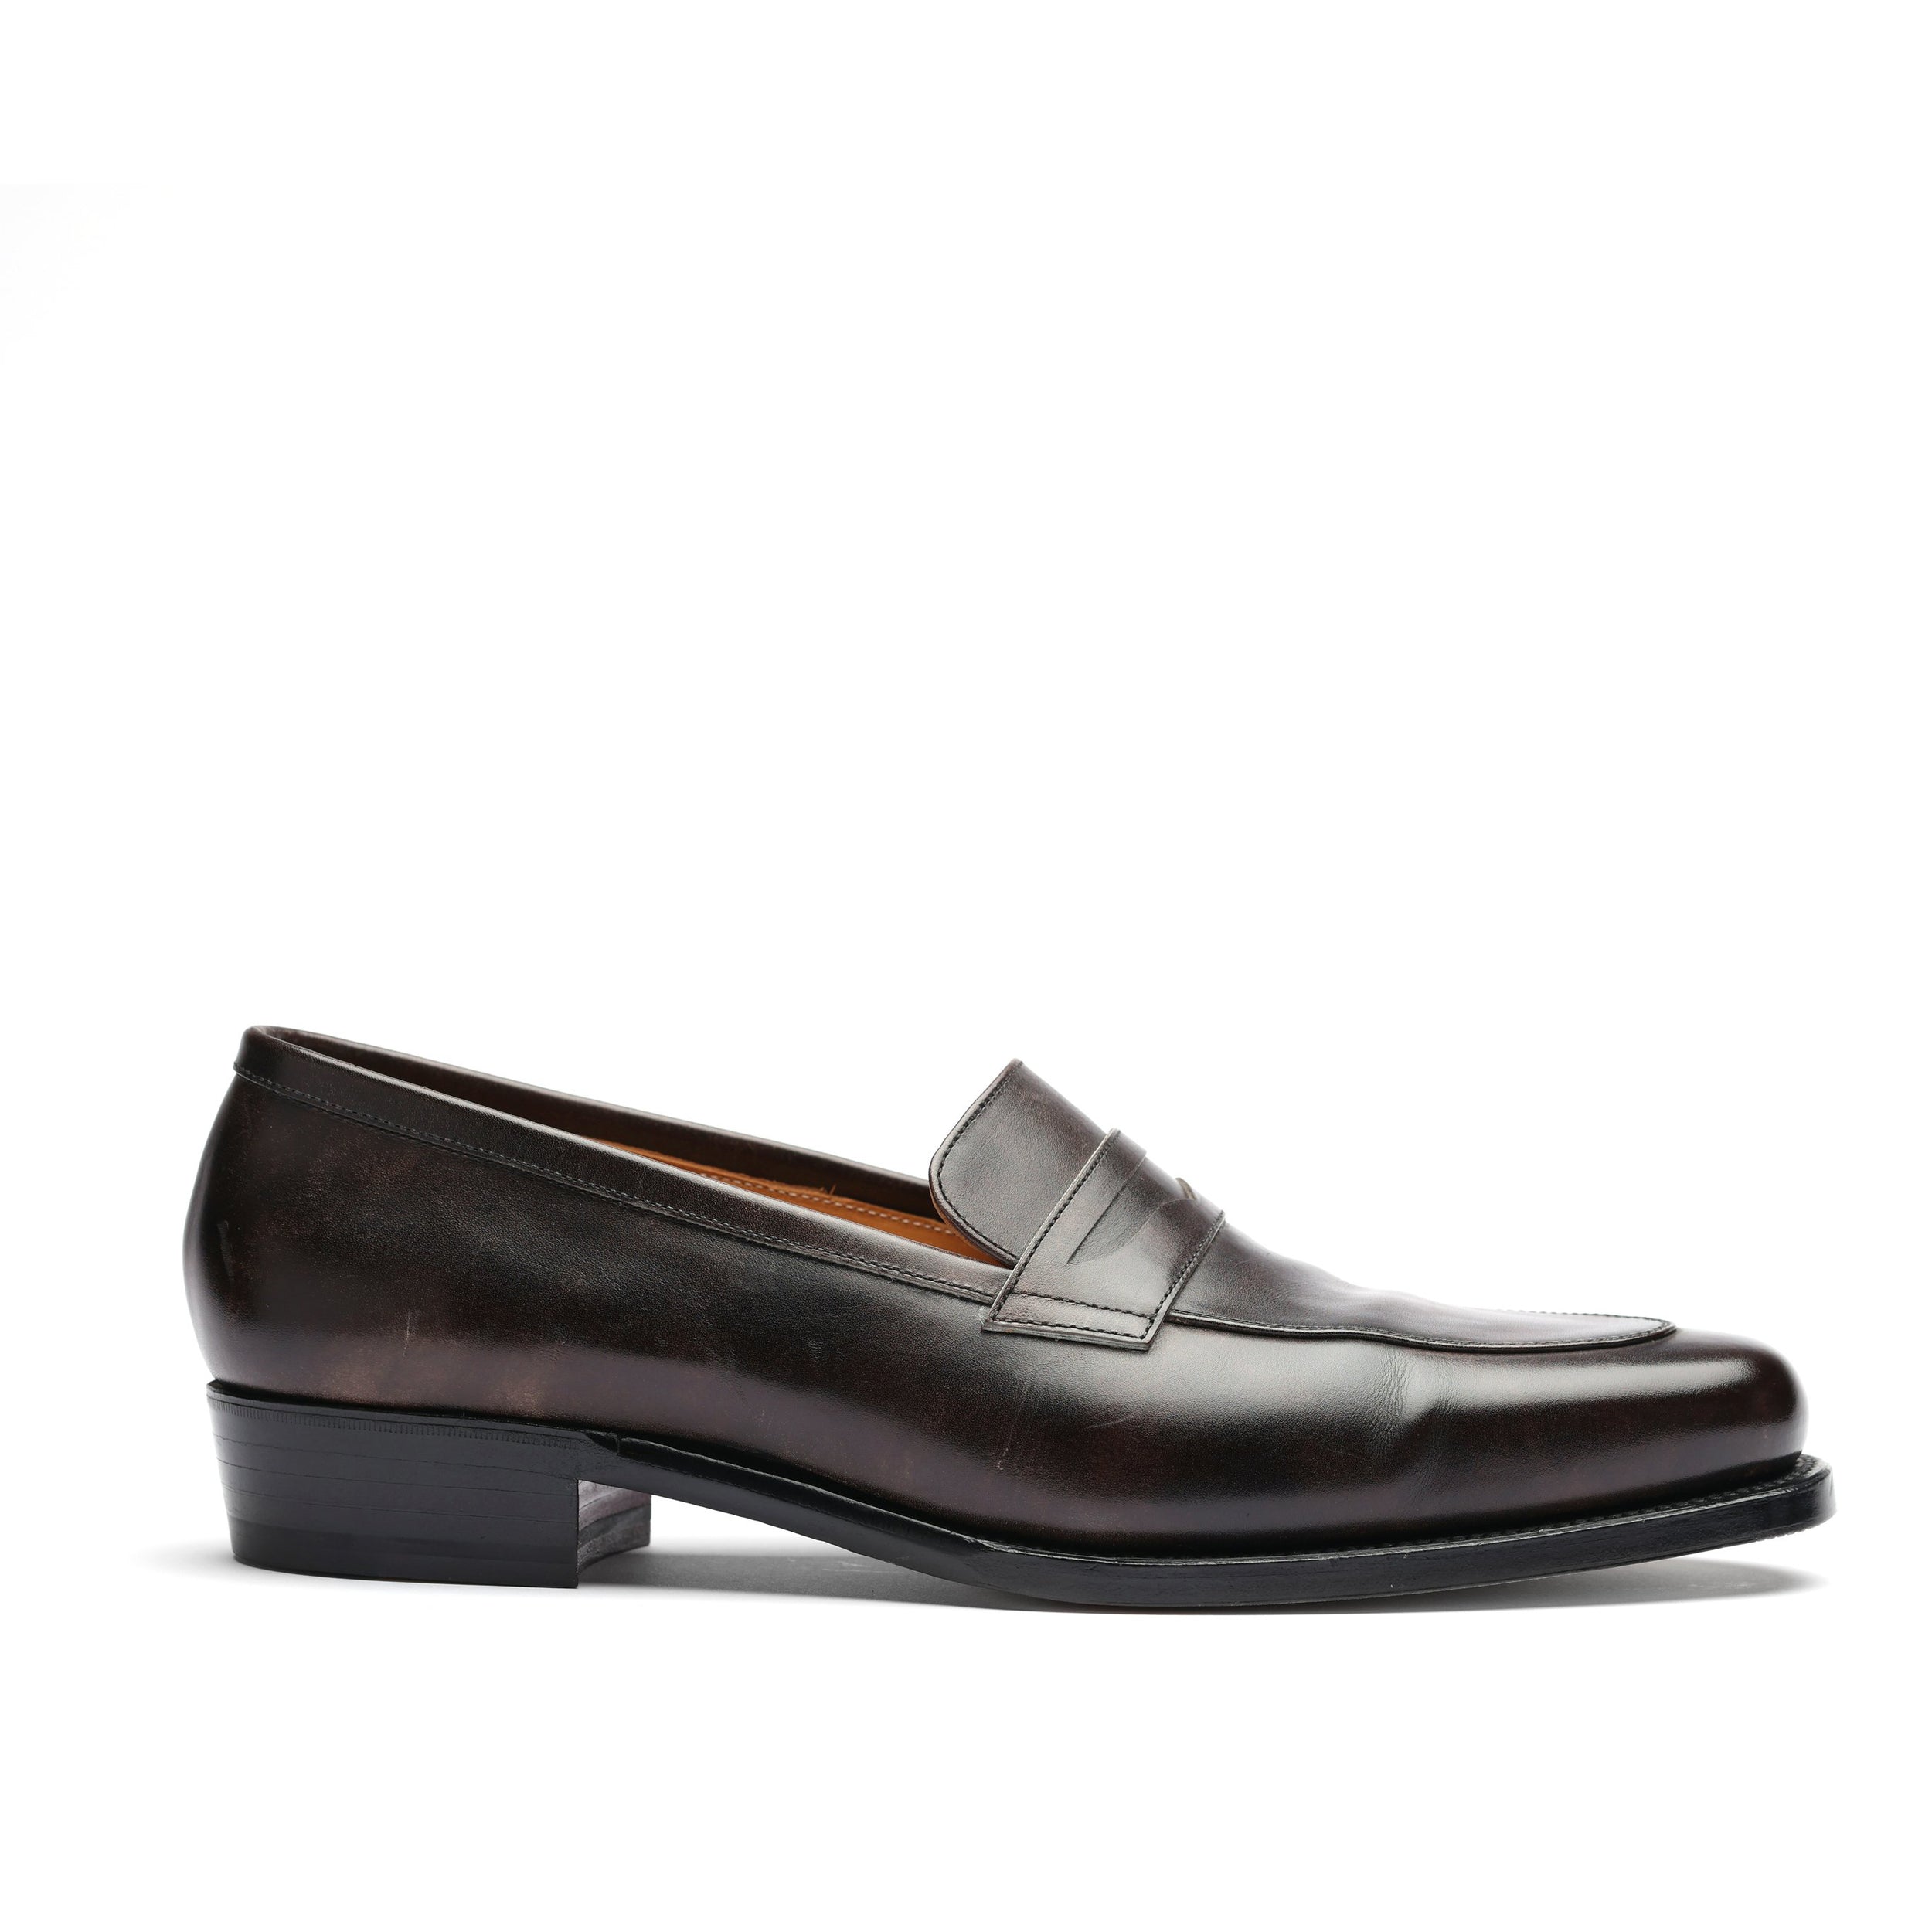 [men's] penny loafers - brown